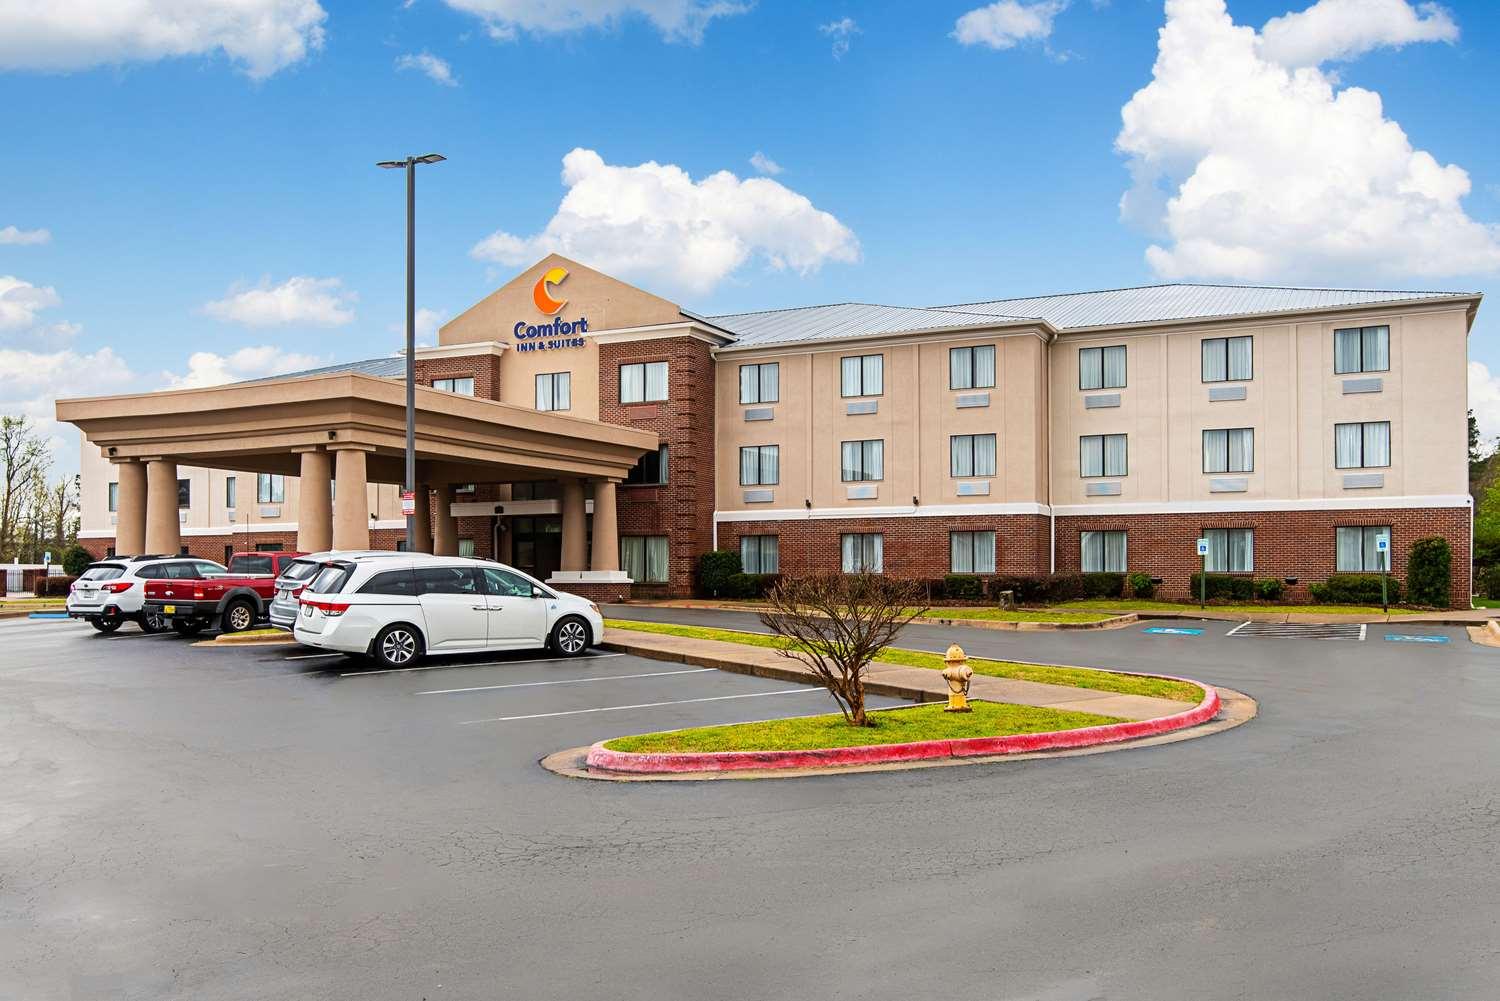 Comfort Inn and Suites in Pine Bluff, AR